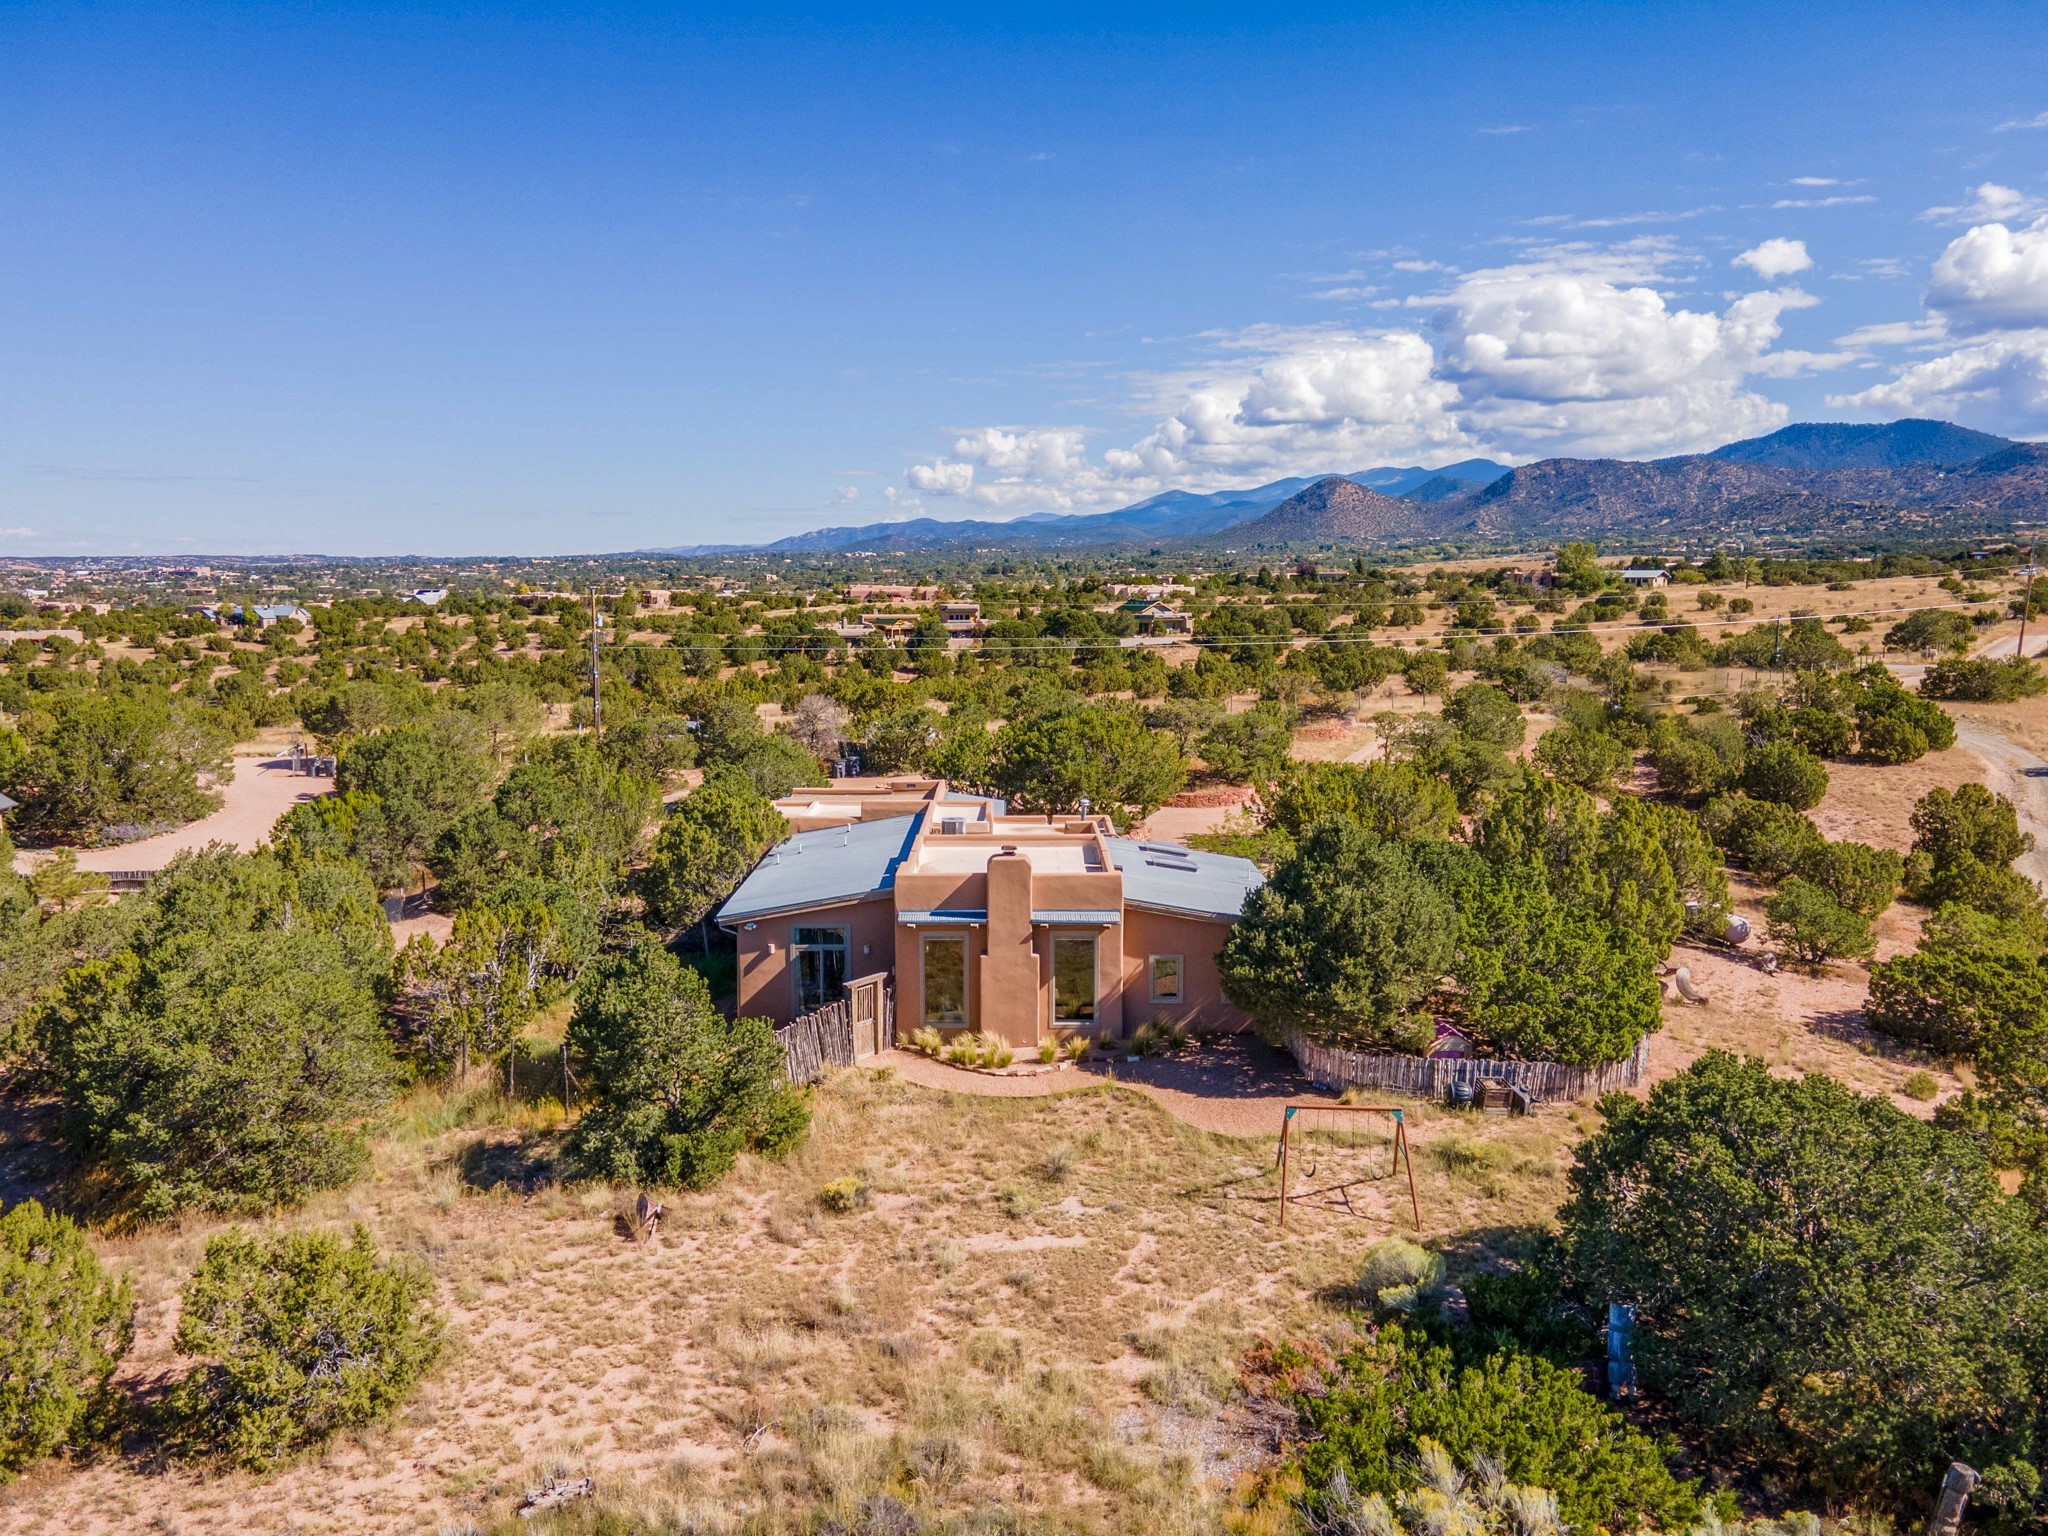 62 Old Agua Fria Rd W, Santa Fe, New Mexico 87508, 3 Bedrooms Bedrooms, ,3 BathroomsBathrooms,Residential,For Sale,62 Old Agua Fria Rd W,202233170